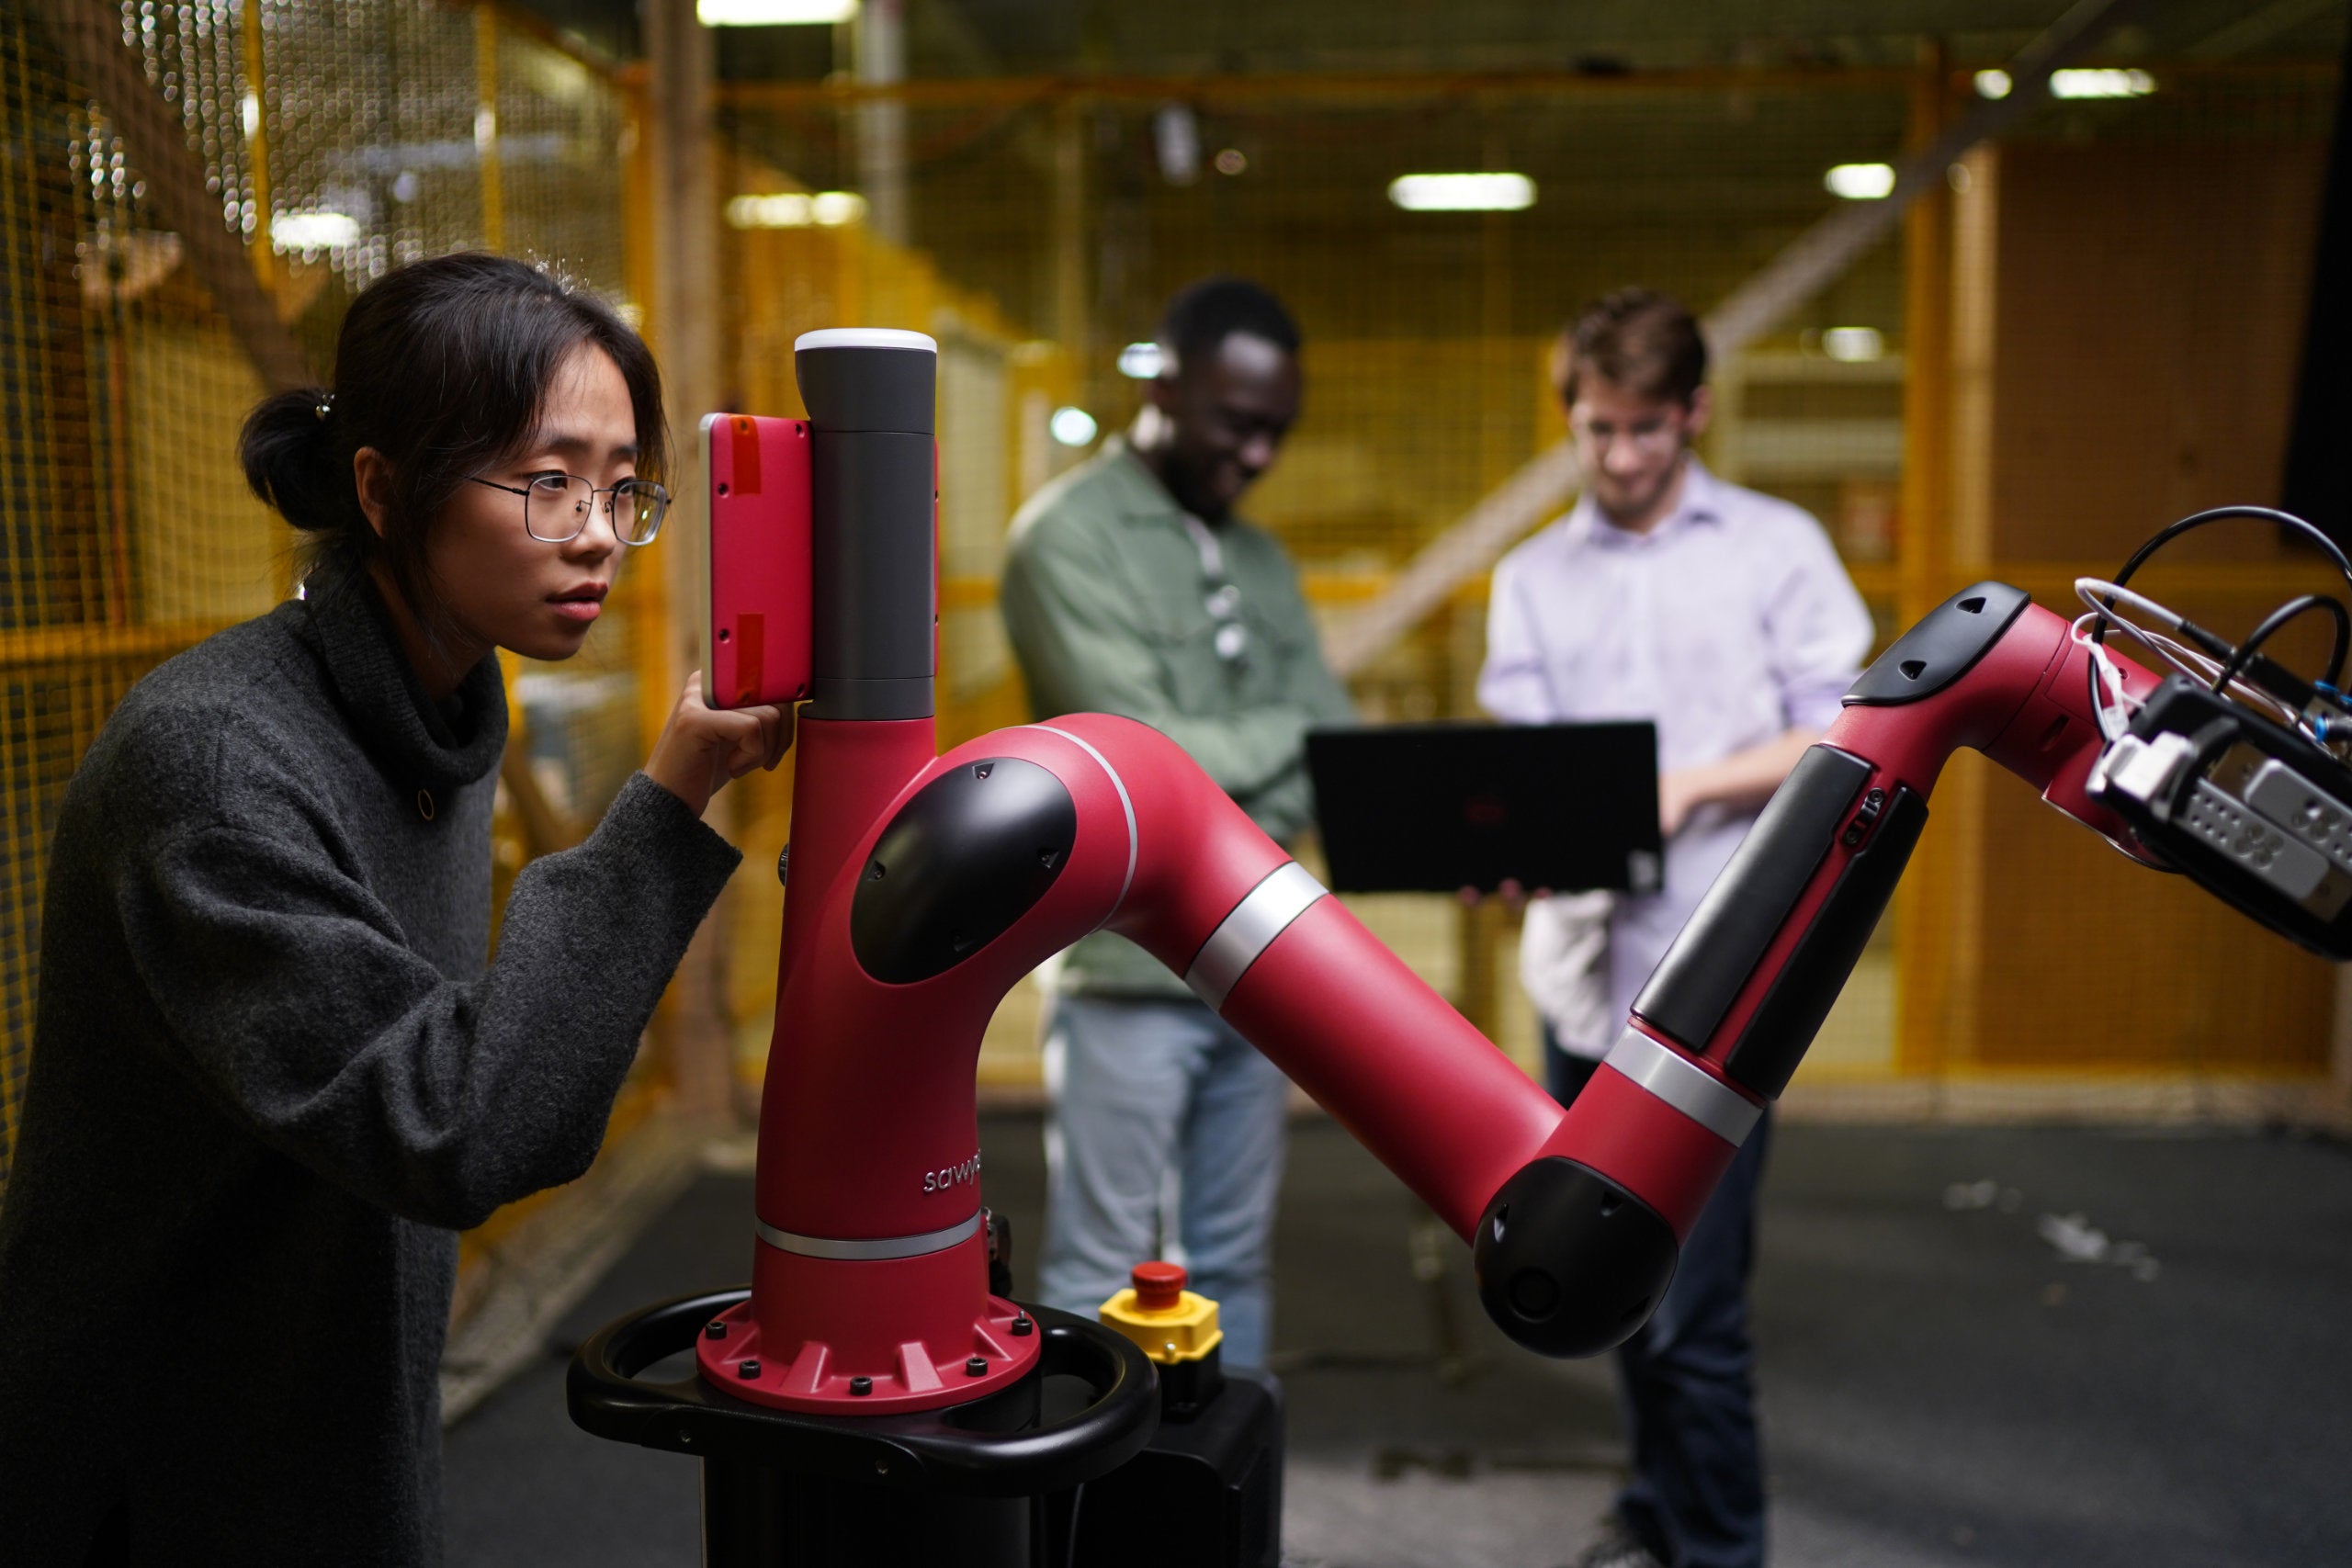 A team of students works with a robotic arm